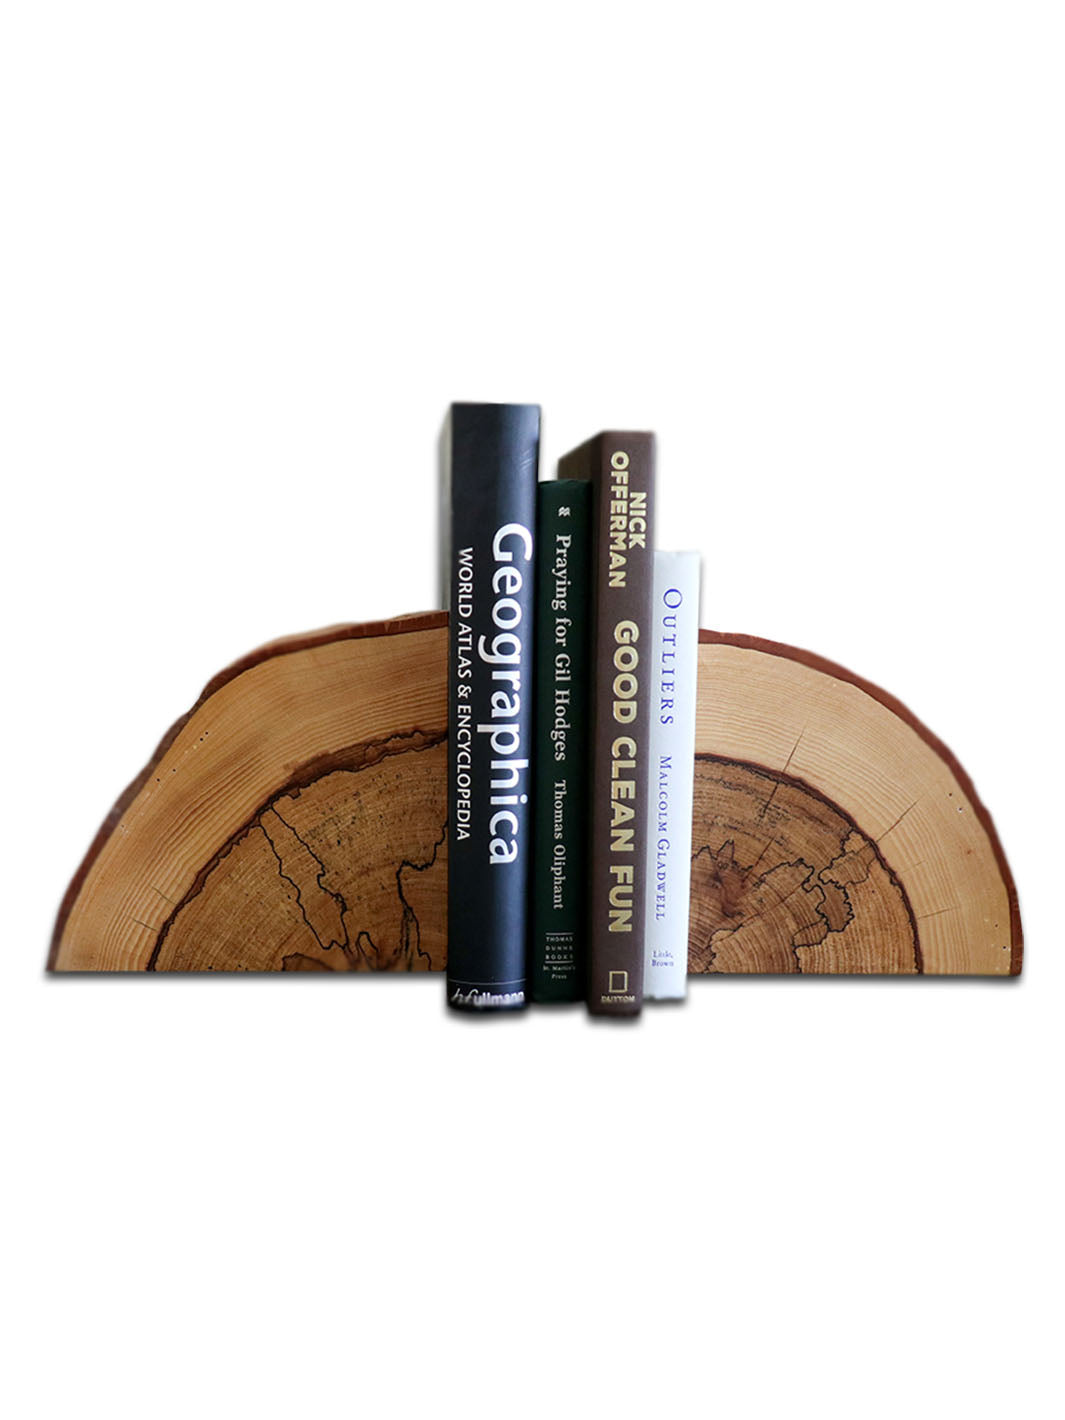 Spalted Hickory Solid Wood Bookends Earthly Comfort Bookends 1257